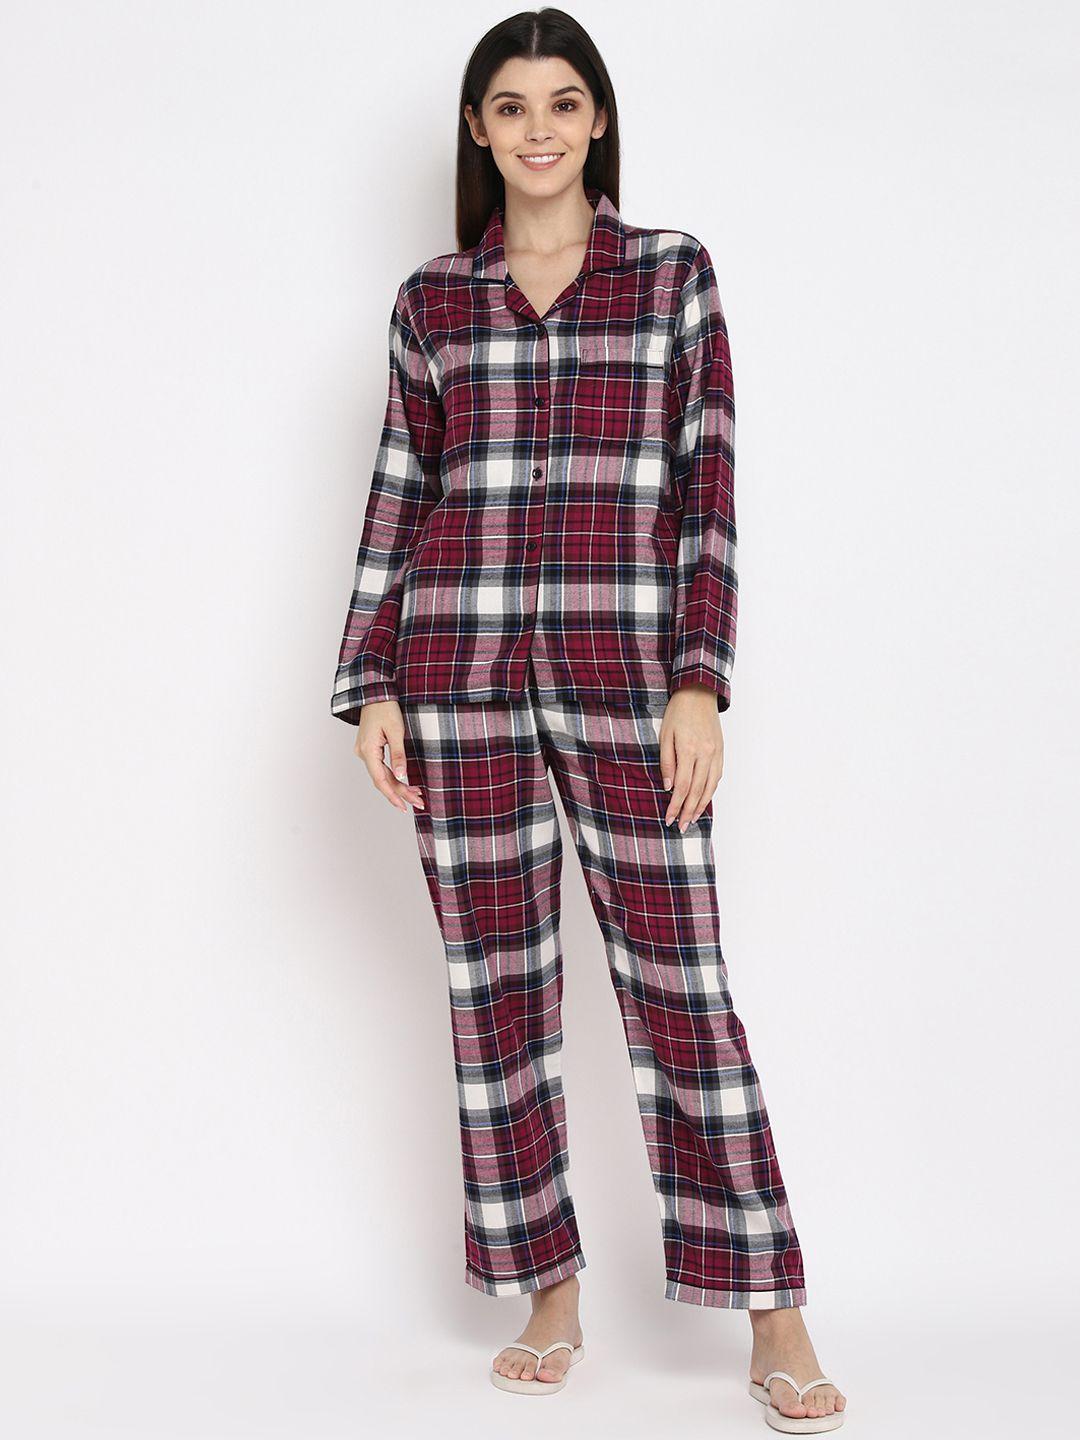 shopbloom-women-maroon-&-white-checked-cotton-night-suit